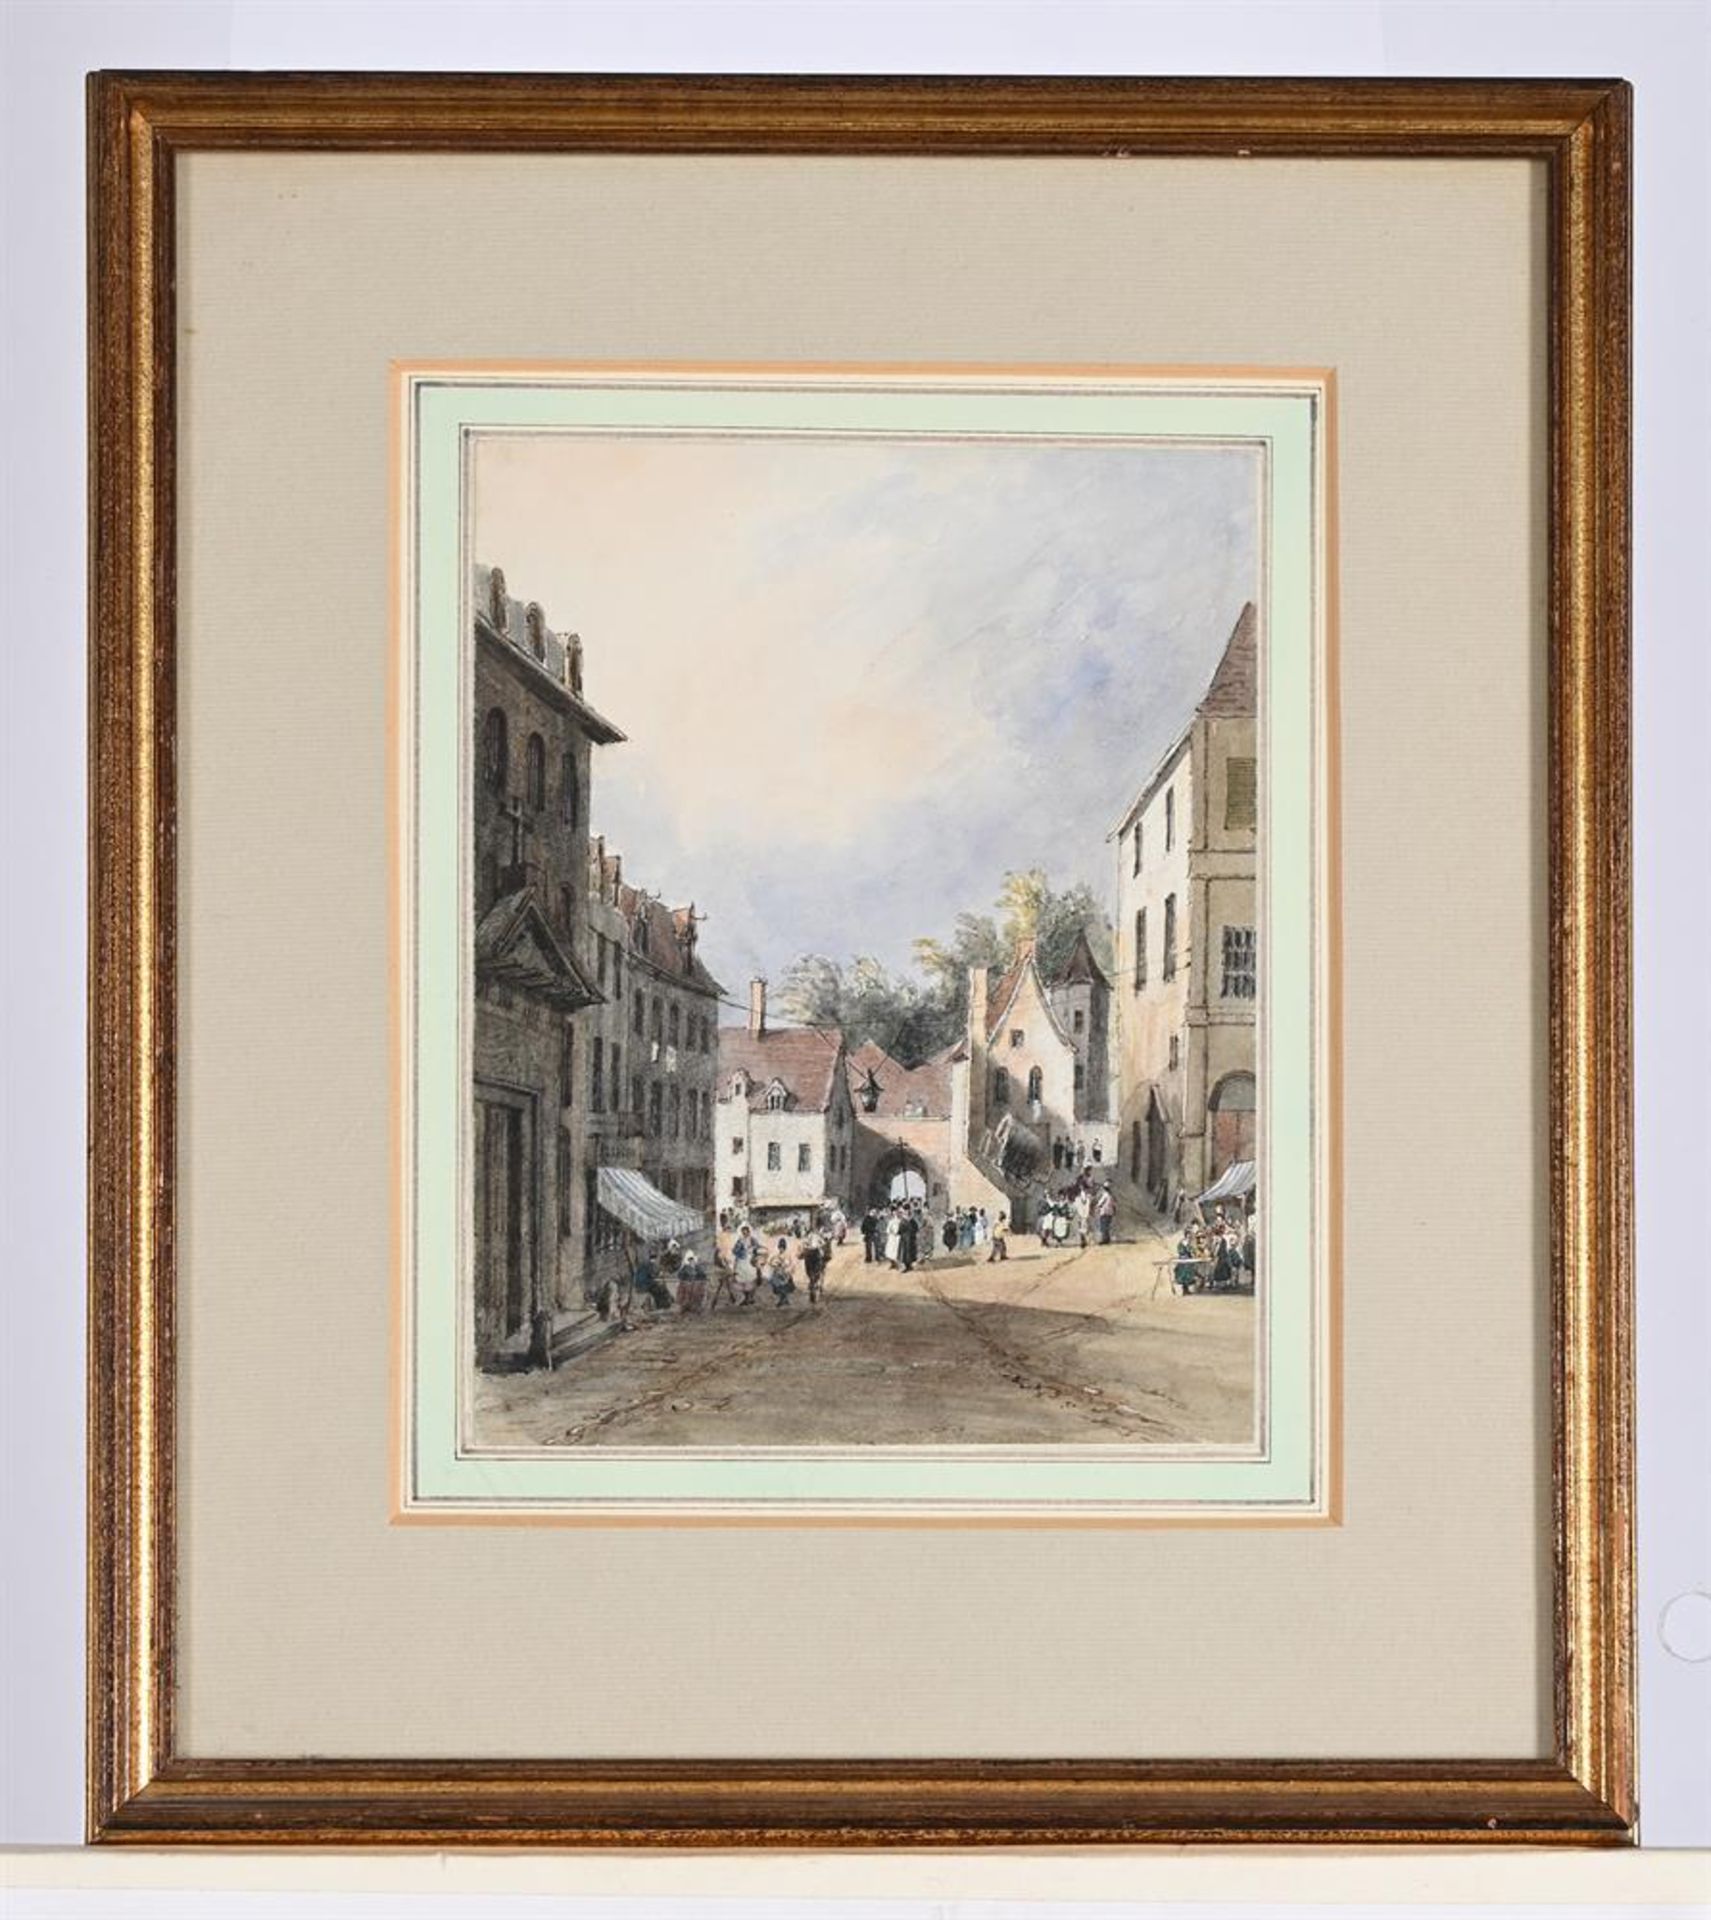 ENGLISH SCHOOL (19TH CENTURY), A FRENCH STREET SCENE WITH A PROCESSION